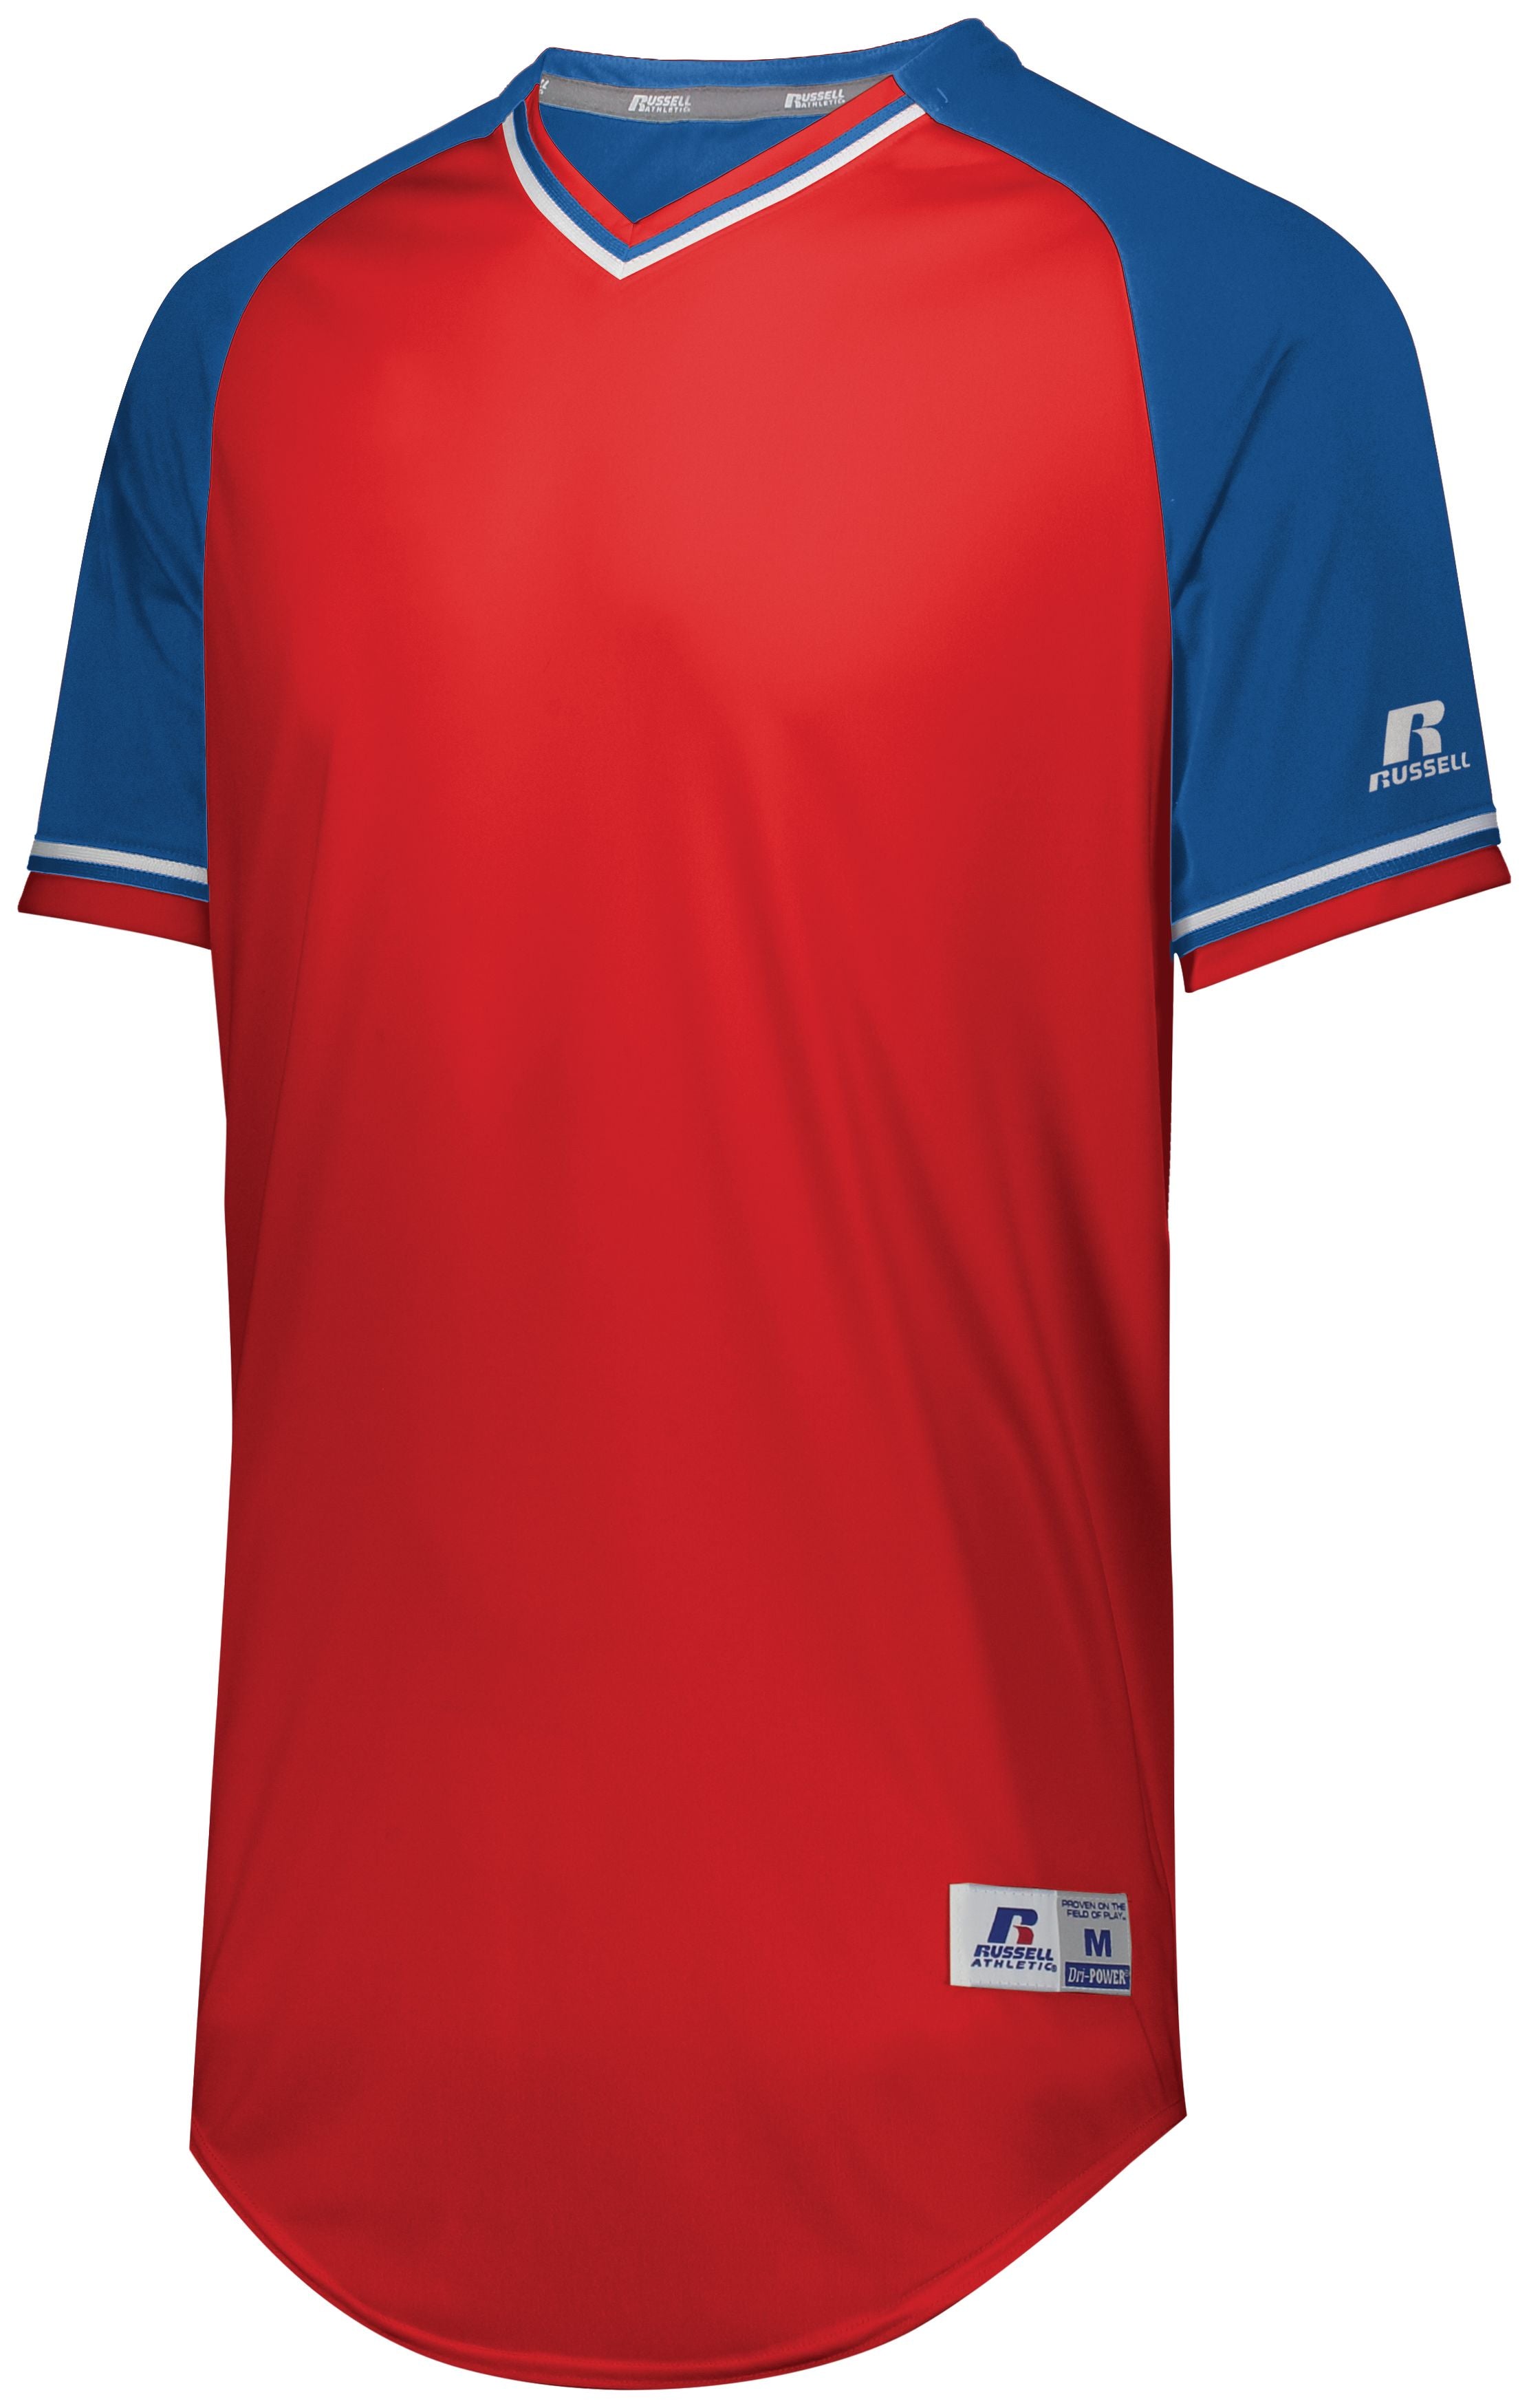 Russell Athletic Youth Classic V-Neck Jersey in True Red/Royal/White  -Part of the Youth, Youth-Jersey, Baseball, Russell-Athletic-Products, Shirts, All-Sports, All-Sports-1 product lines at KanaleyCreations.com